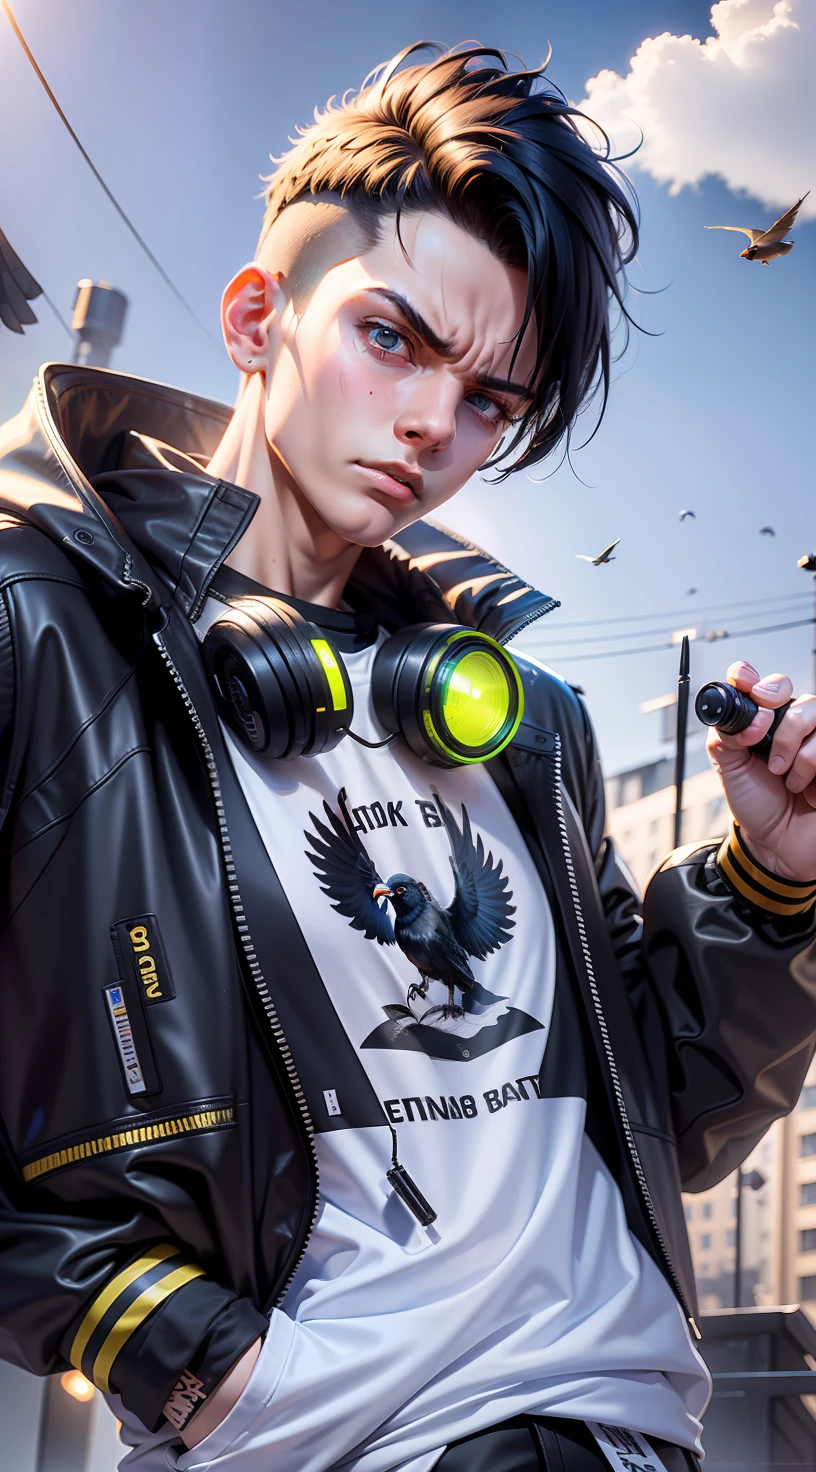 ((8K Resolution)), ((Character)), 1boy, 20y.o, black jacket, waite t-Shirt,angry face, earphon on a neck,pistol on a arm, wait and black hair, short hair, draw bird on a t-Shirt, Realistic, Ultra detail